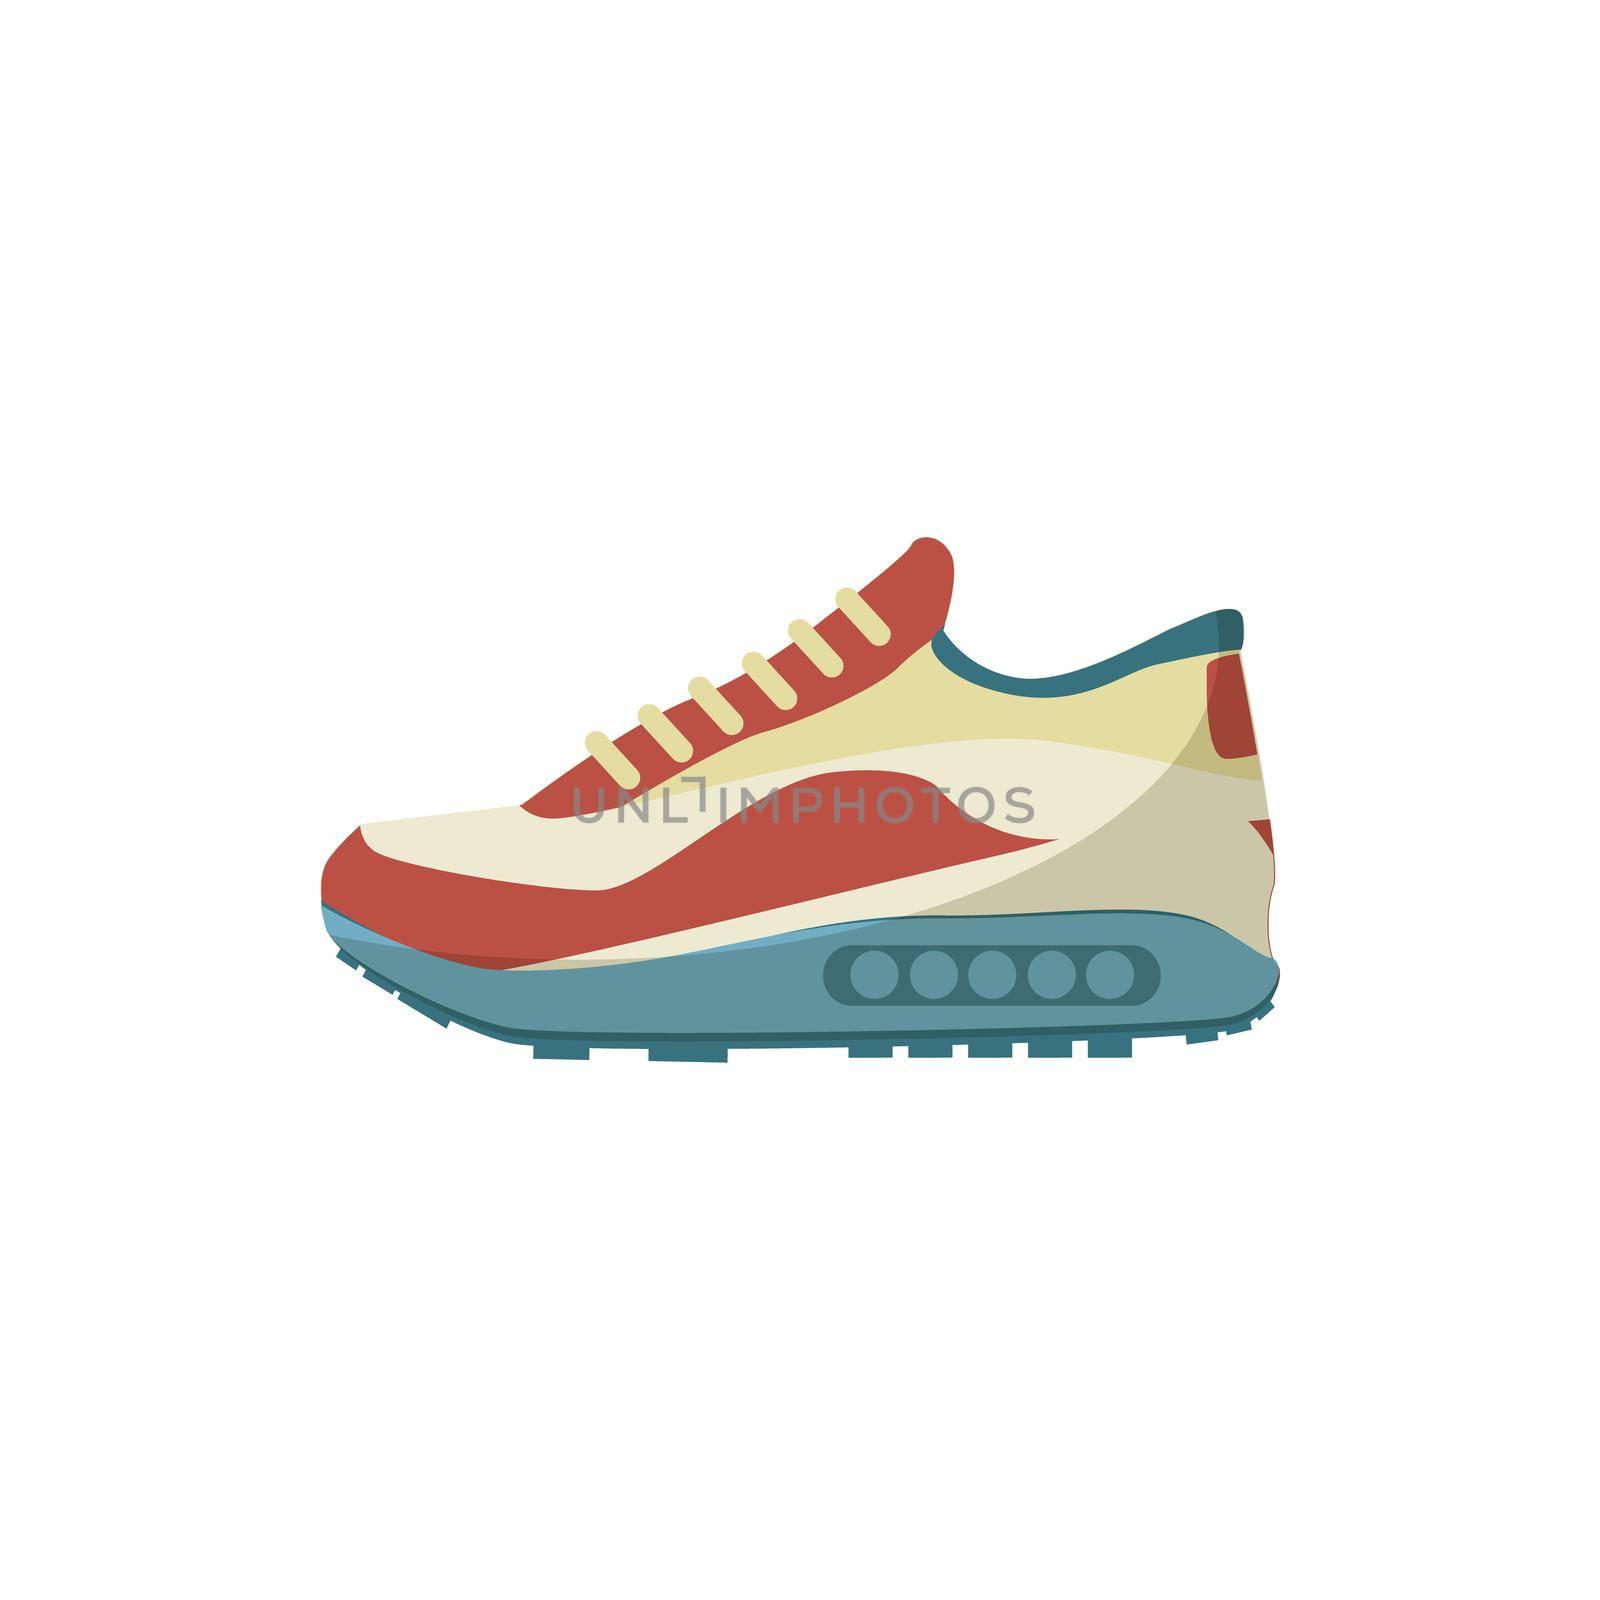 Sneakers icon in cartoon style on a white background